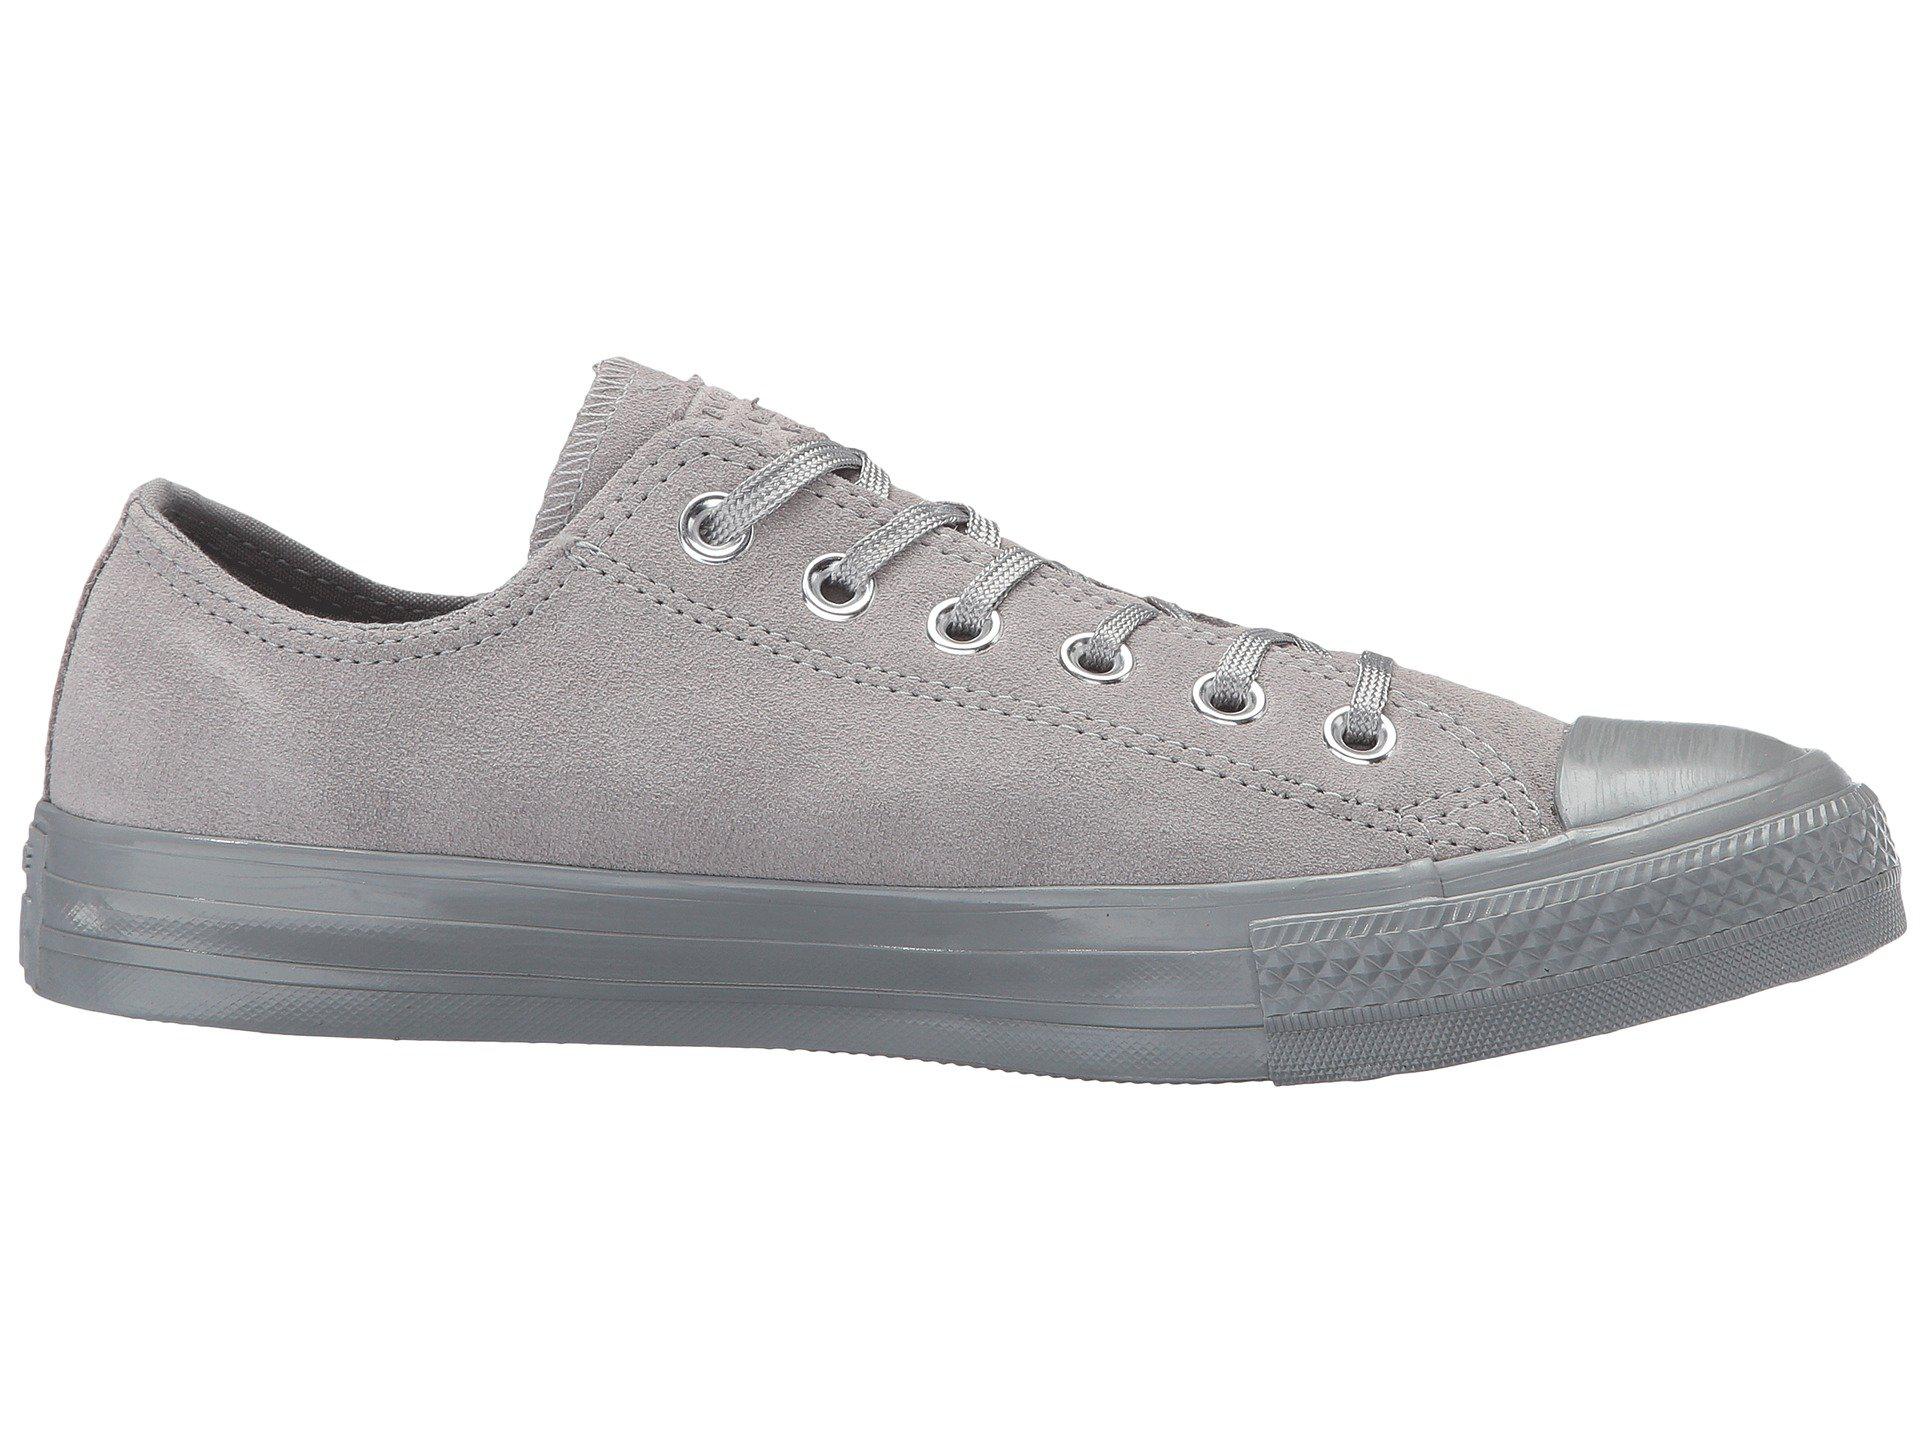 Converse Chuck Taylor All Star - Mono Plush Suede Ox in Gray - Lyst